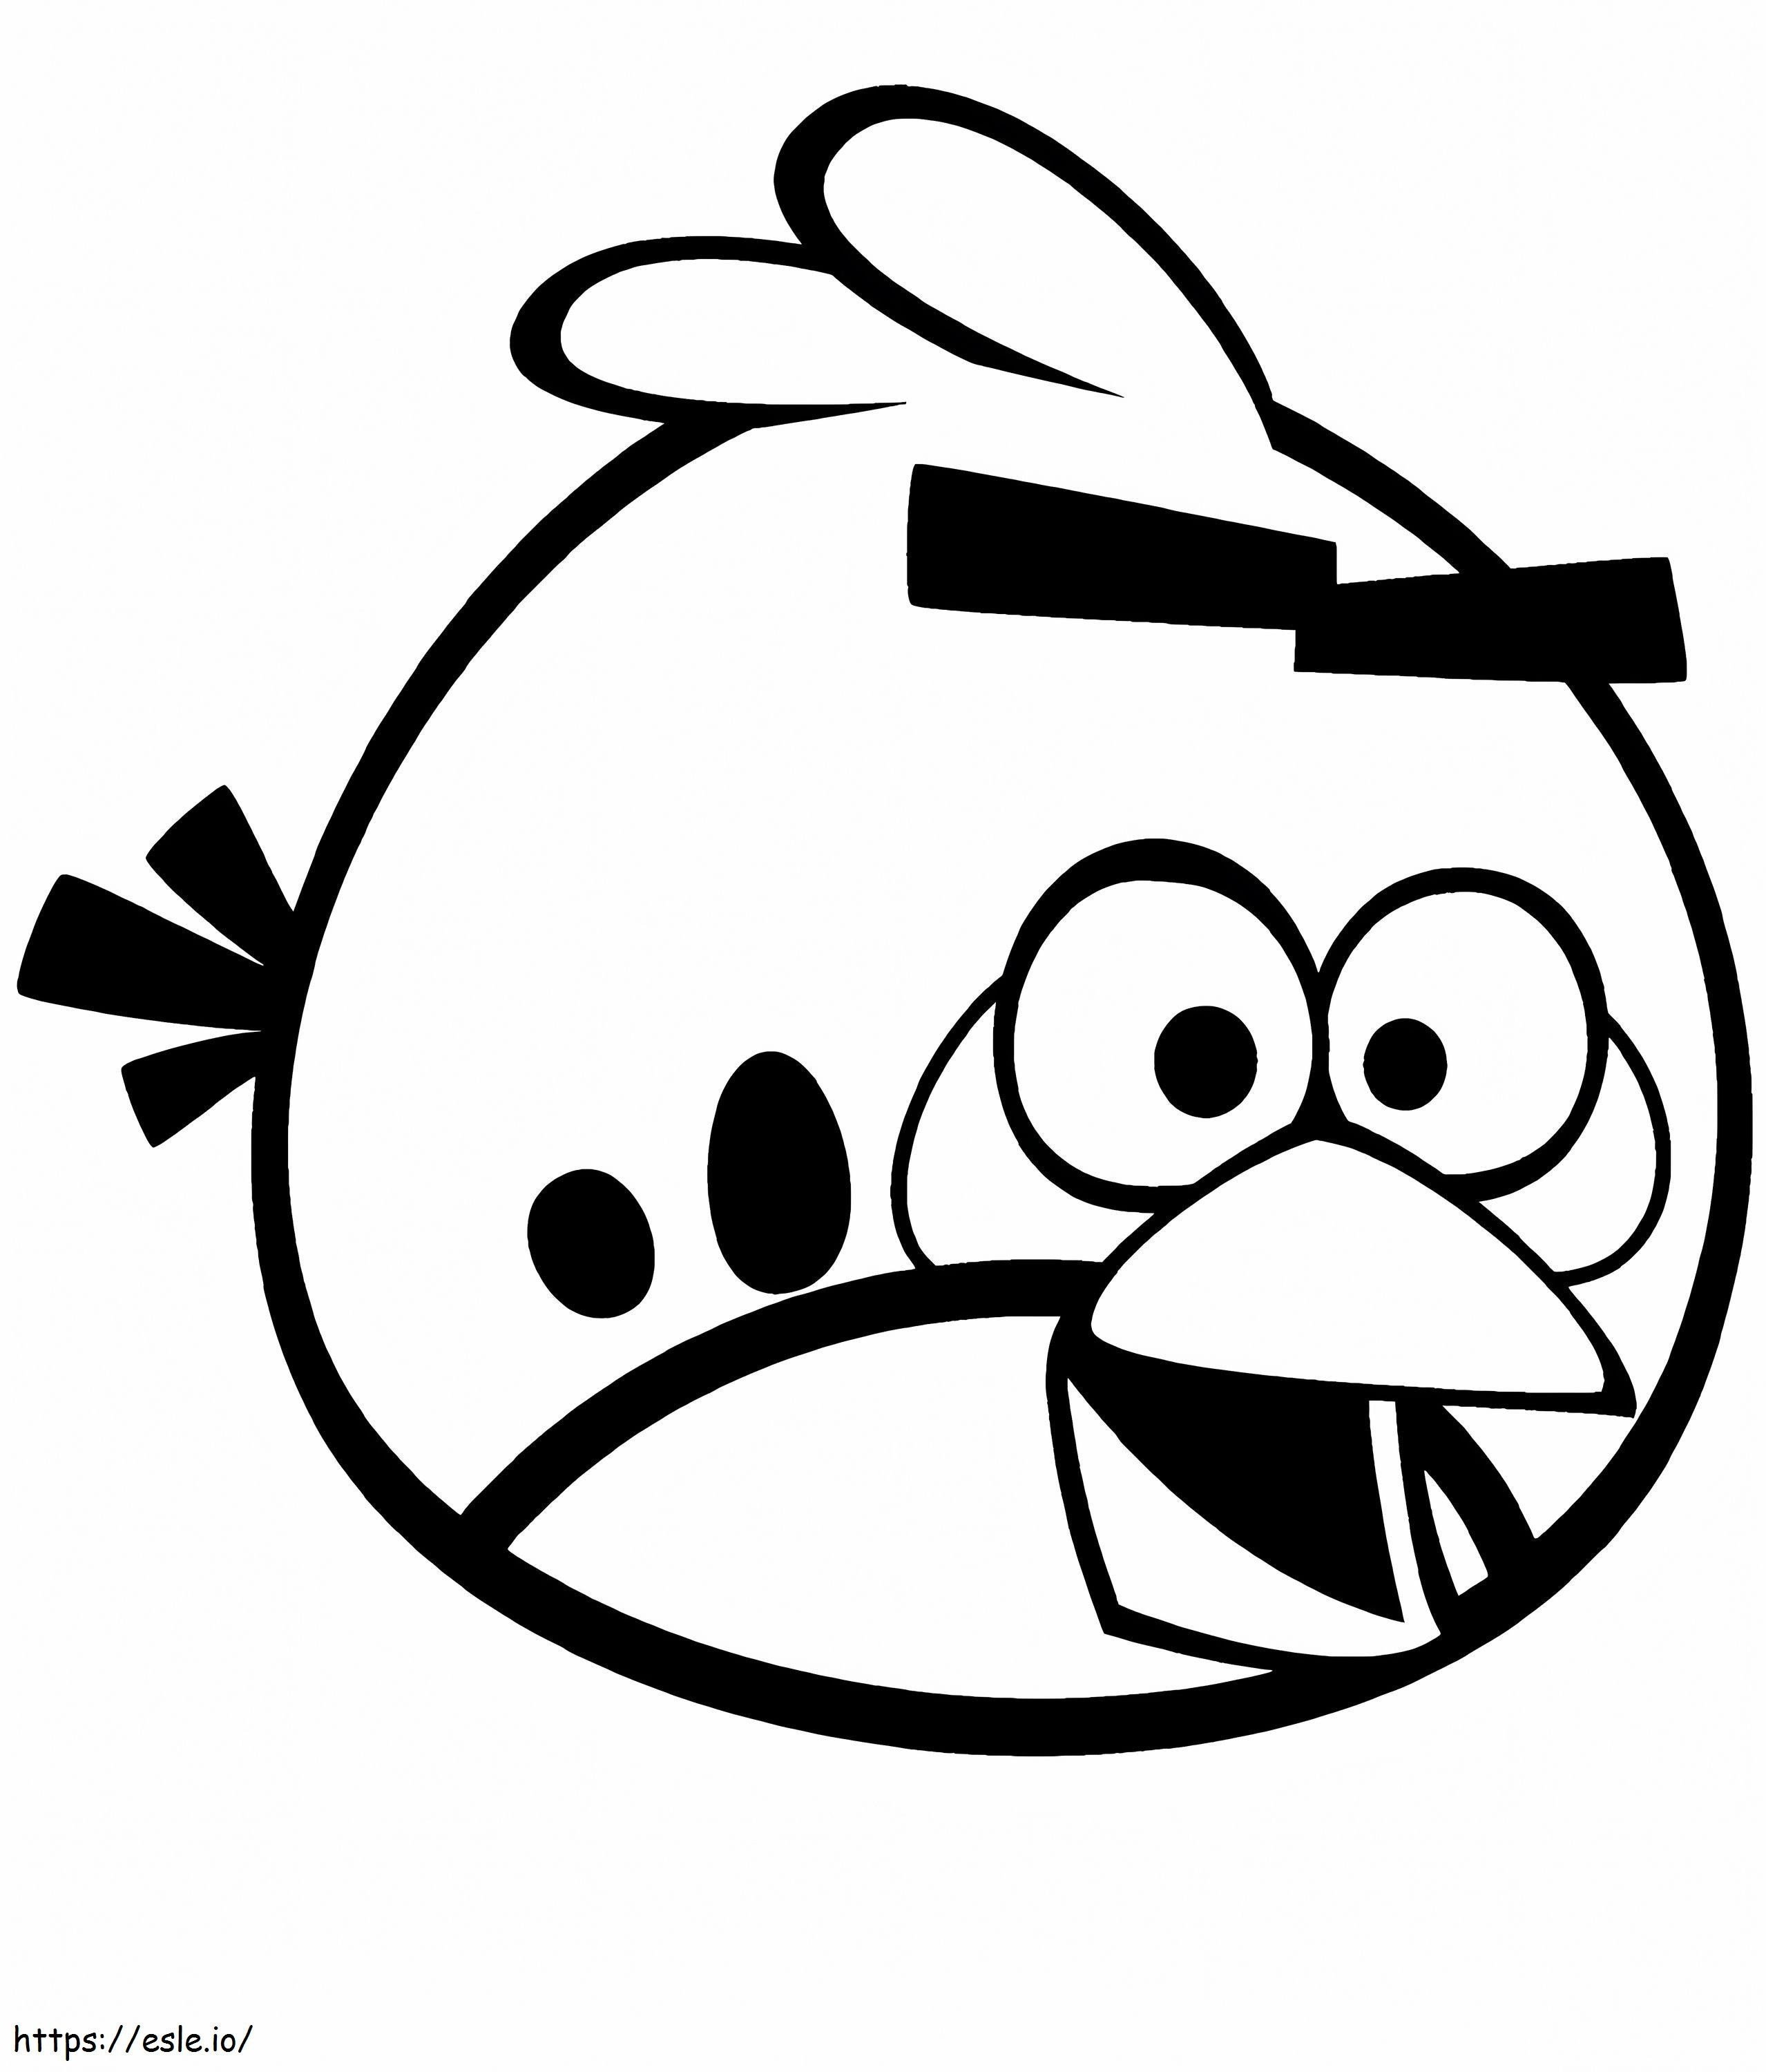 1547883278 Red Angry Bird coloring page